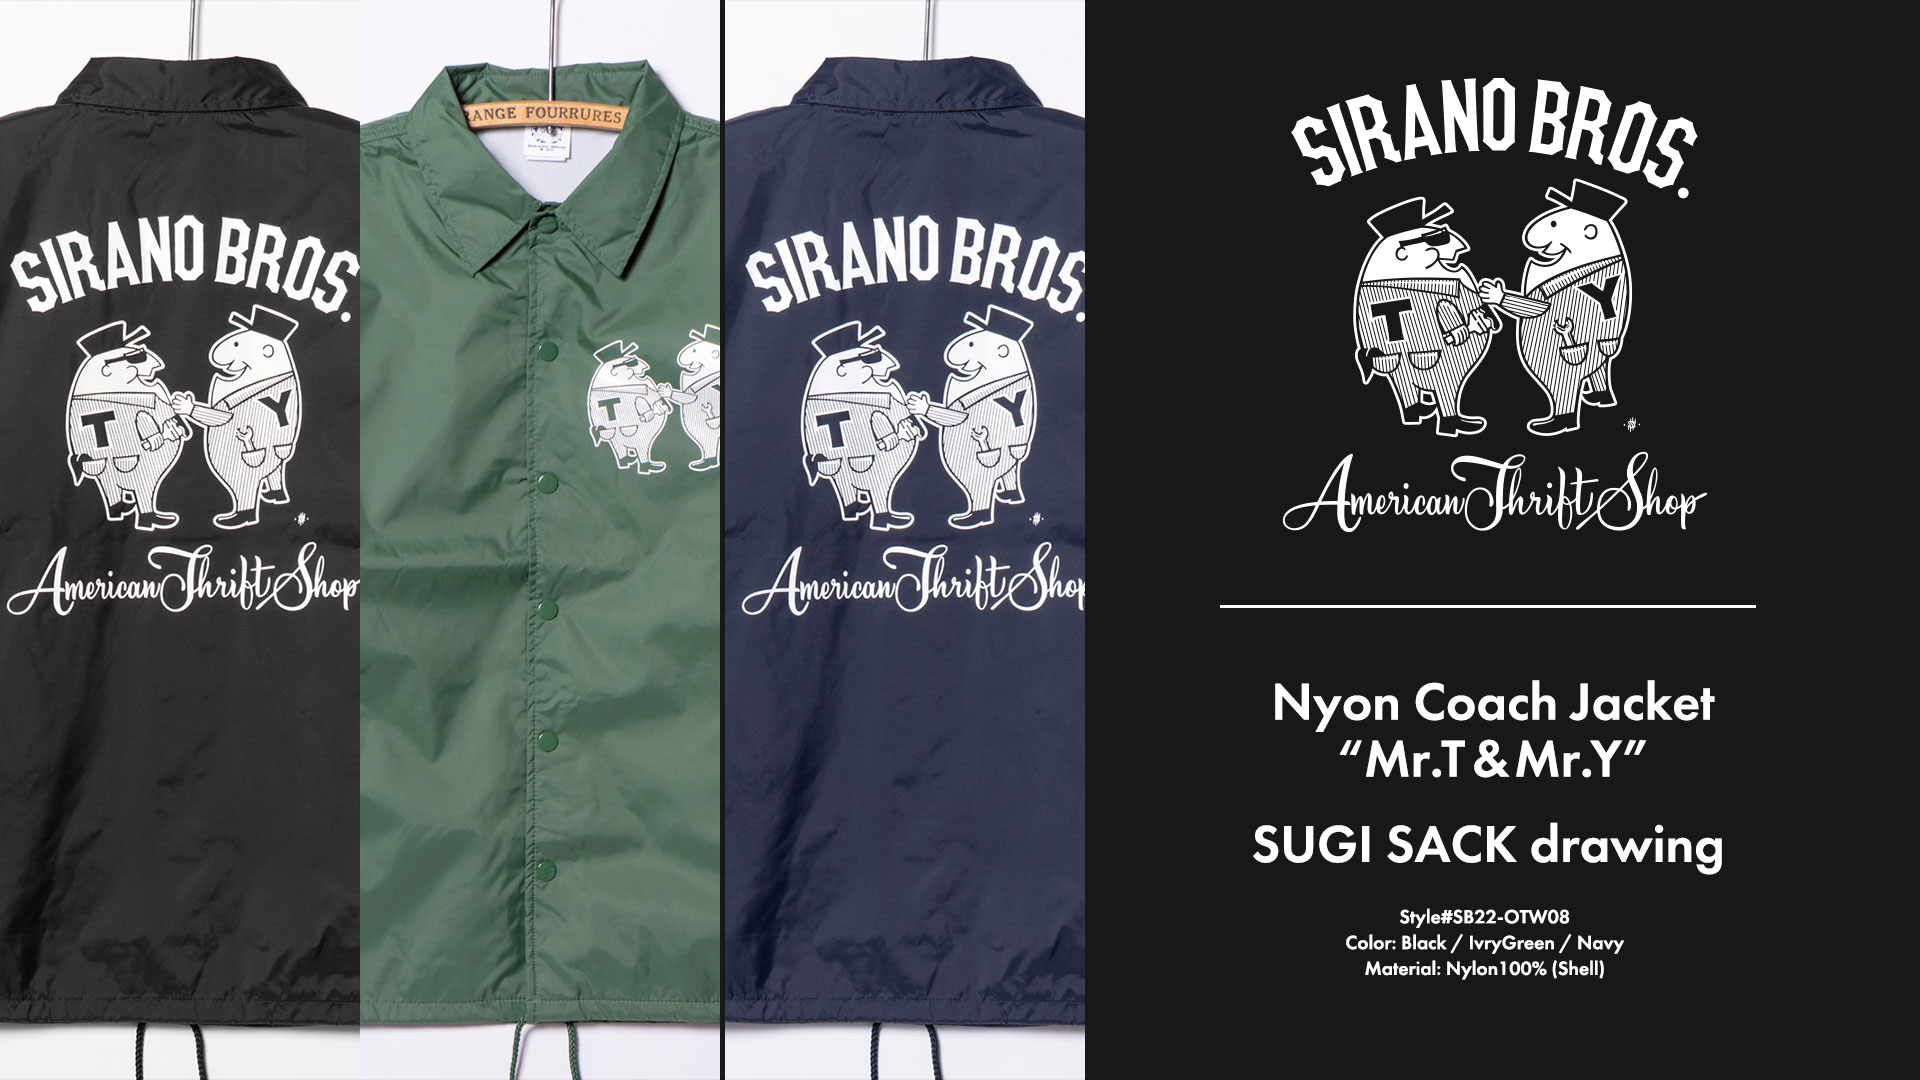 Sirano Bros. & Co. | Satisfactory and Ideal things is Real 